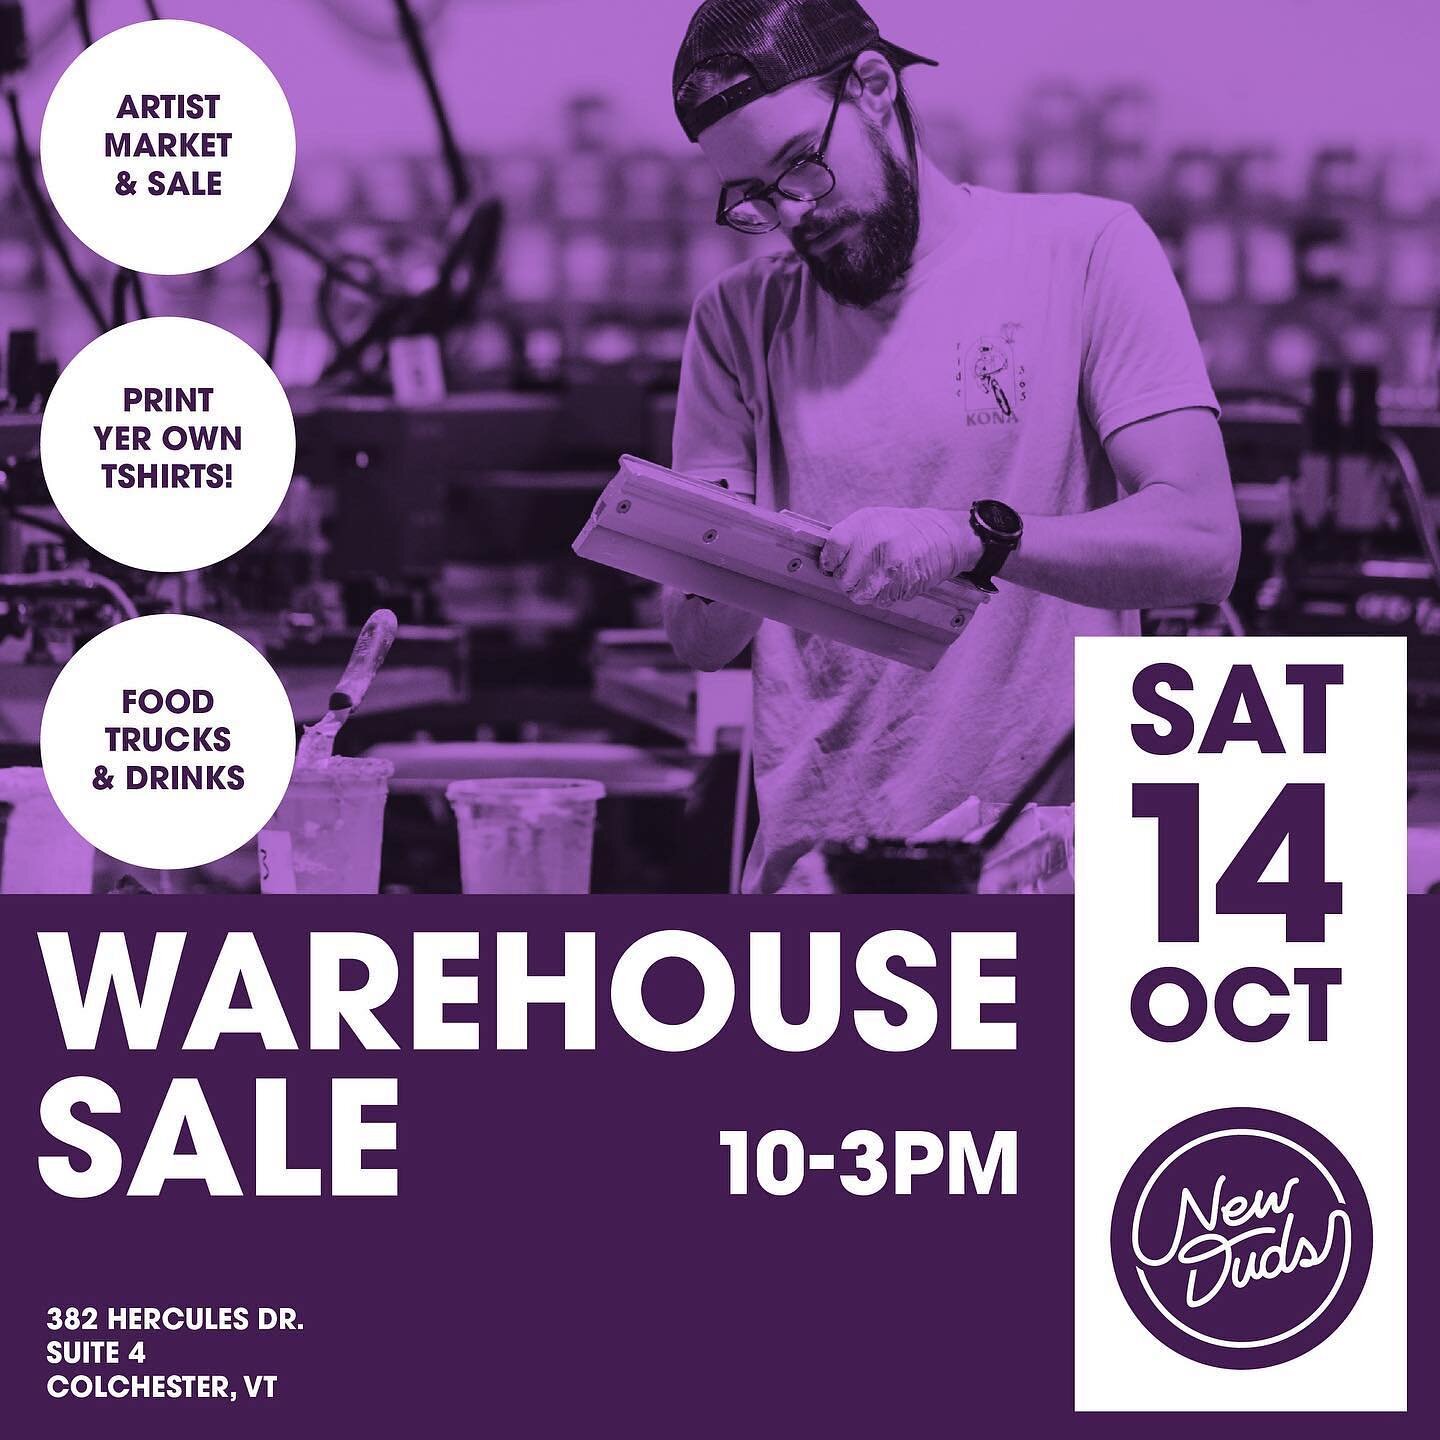 It's back! Mark your calendars, save this date. Our biggest deepest warehouse sale is happening. We will have discounts on our line of products, many to be retired permanently. Our awesome staff will be helping you pull a squeegee with Print Your Own